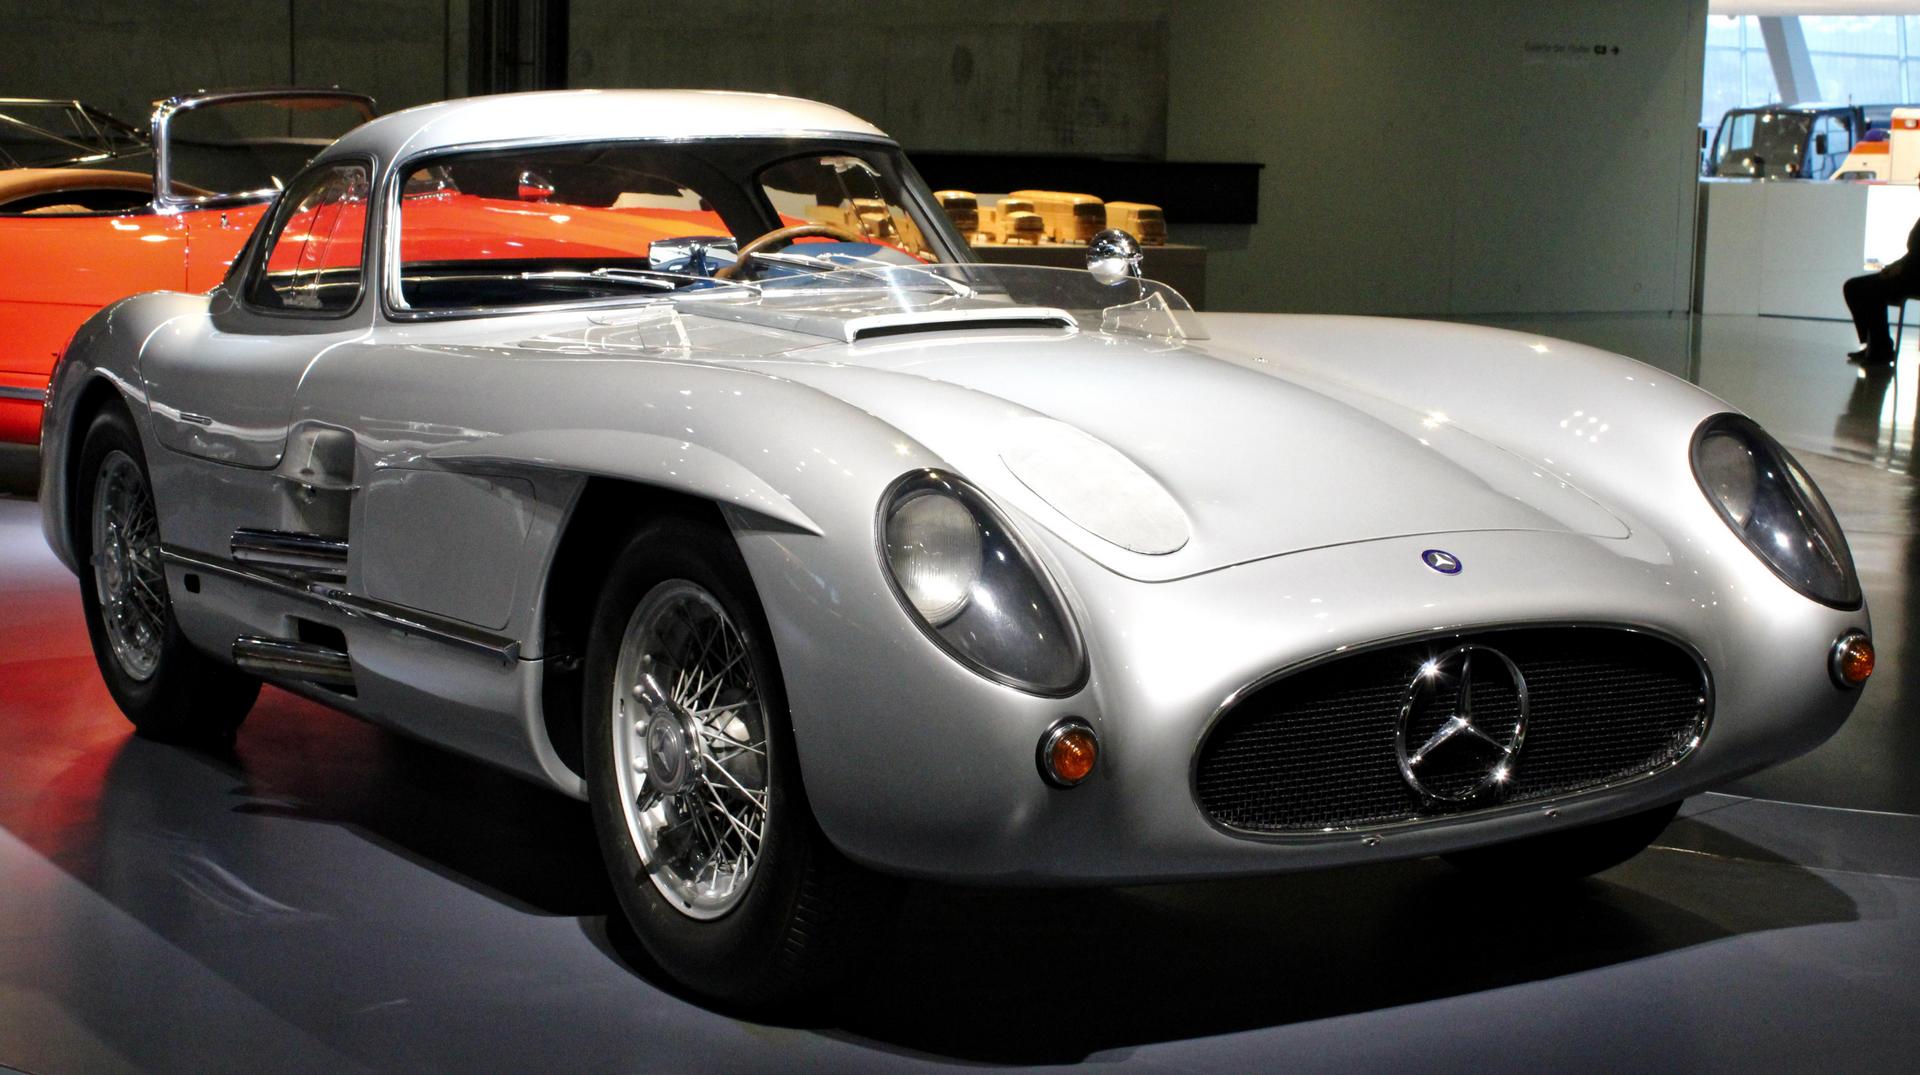 Rumor Has it Mercedes-Benz Museum Sold their SLR 300 Coupe for $142 Million  - GTspirit